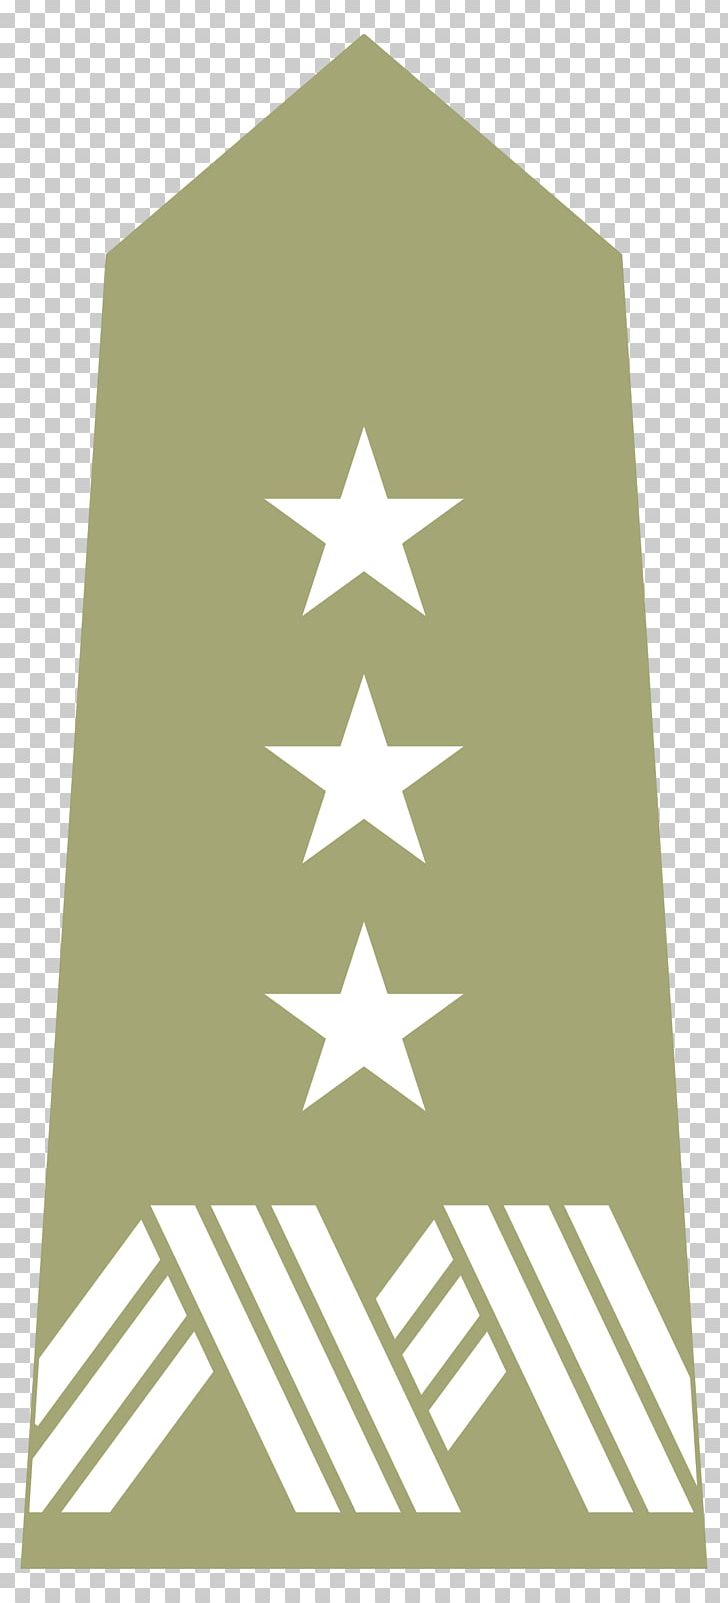 Generał Broni General Military Rank Polish Land Forces PNG, Clipart, Angle, Army, Brigade, Commanding Officer, Epaulette Free PNG Download